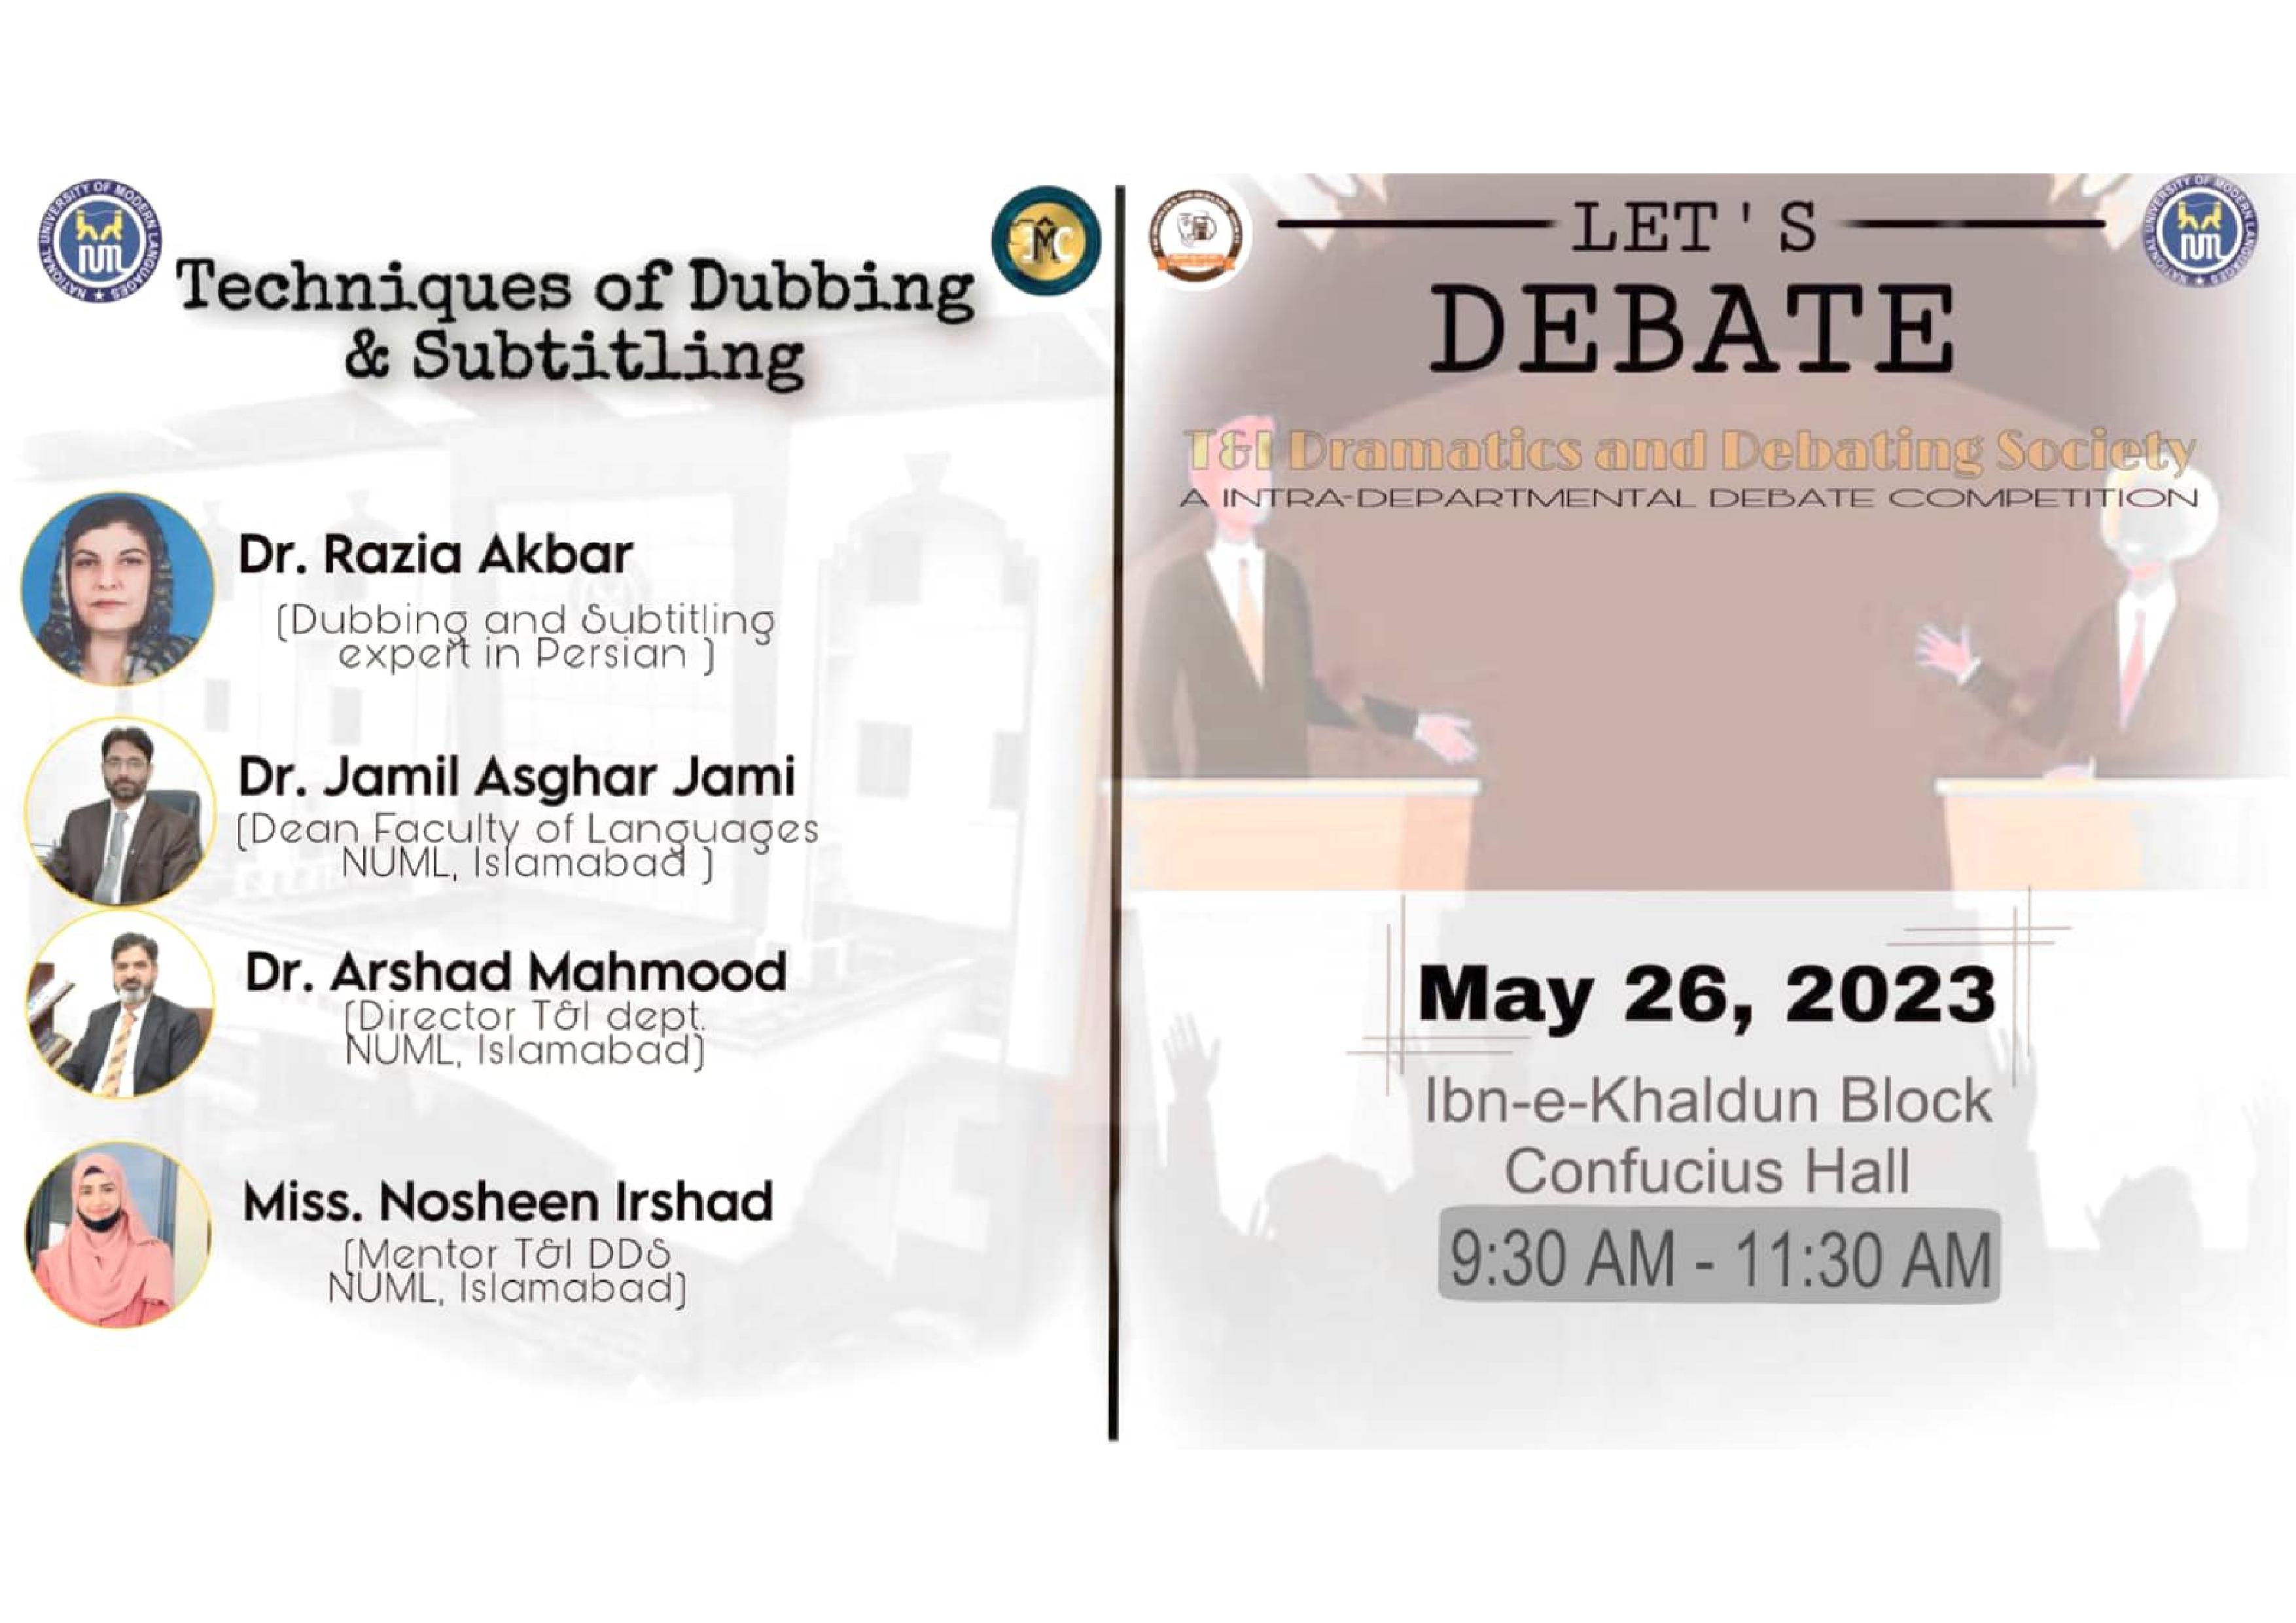 A Lecture on Dubbing and Subtitling and Departmental Declamation Contest